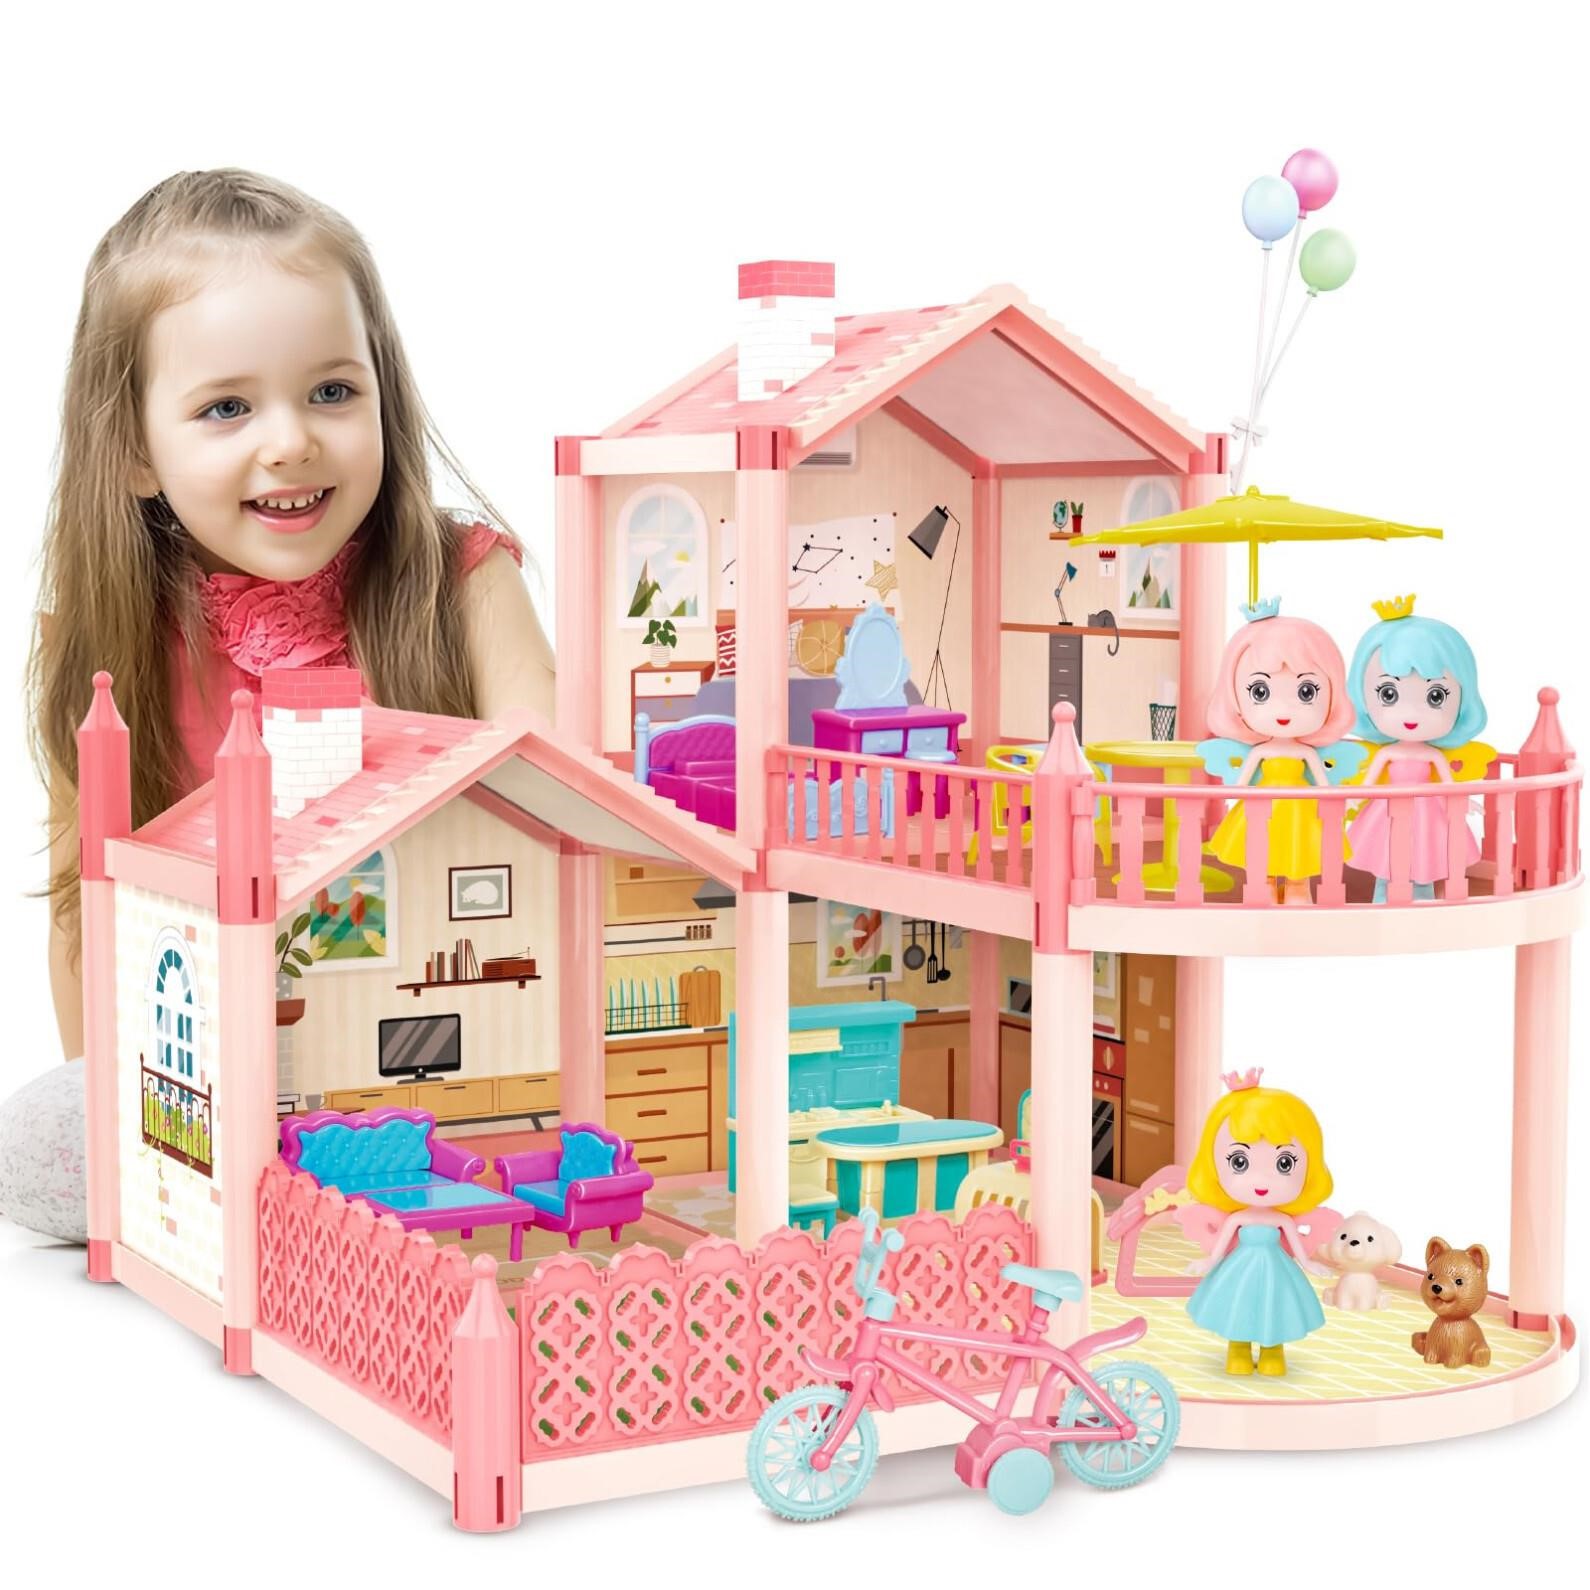 deAO Doll House for 3 4 5 6 Years Old Girls Toy,2-